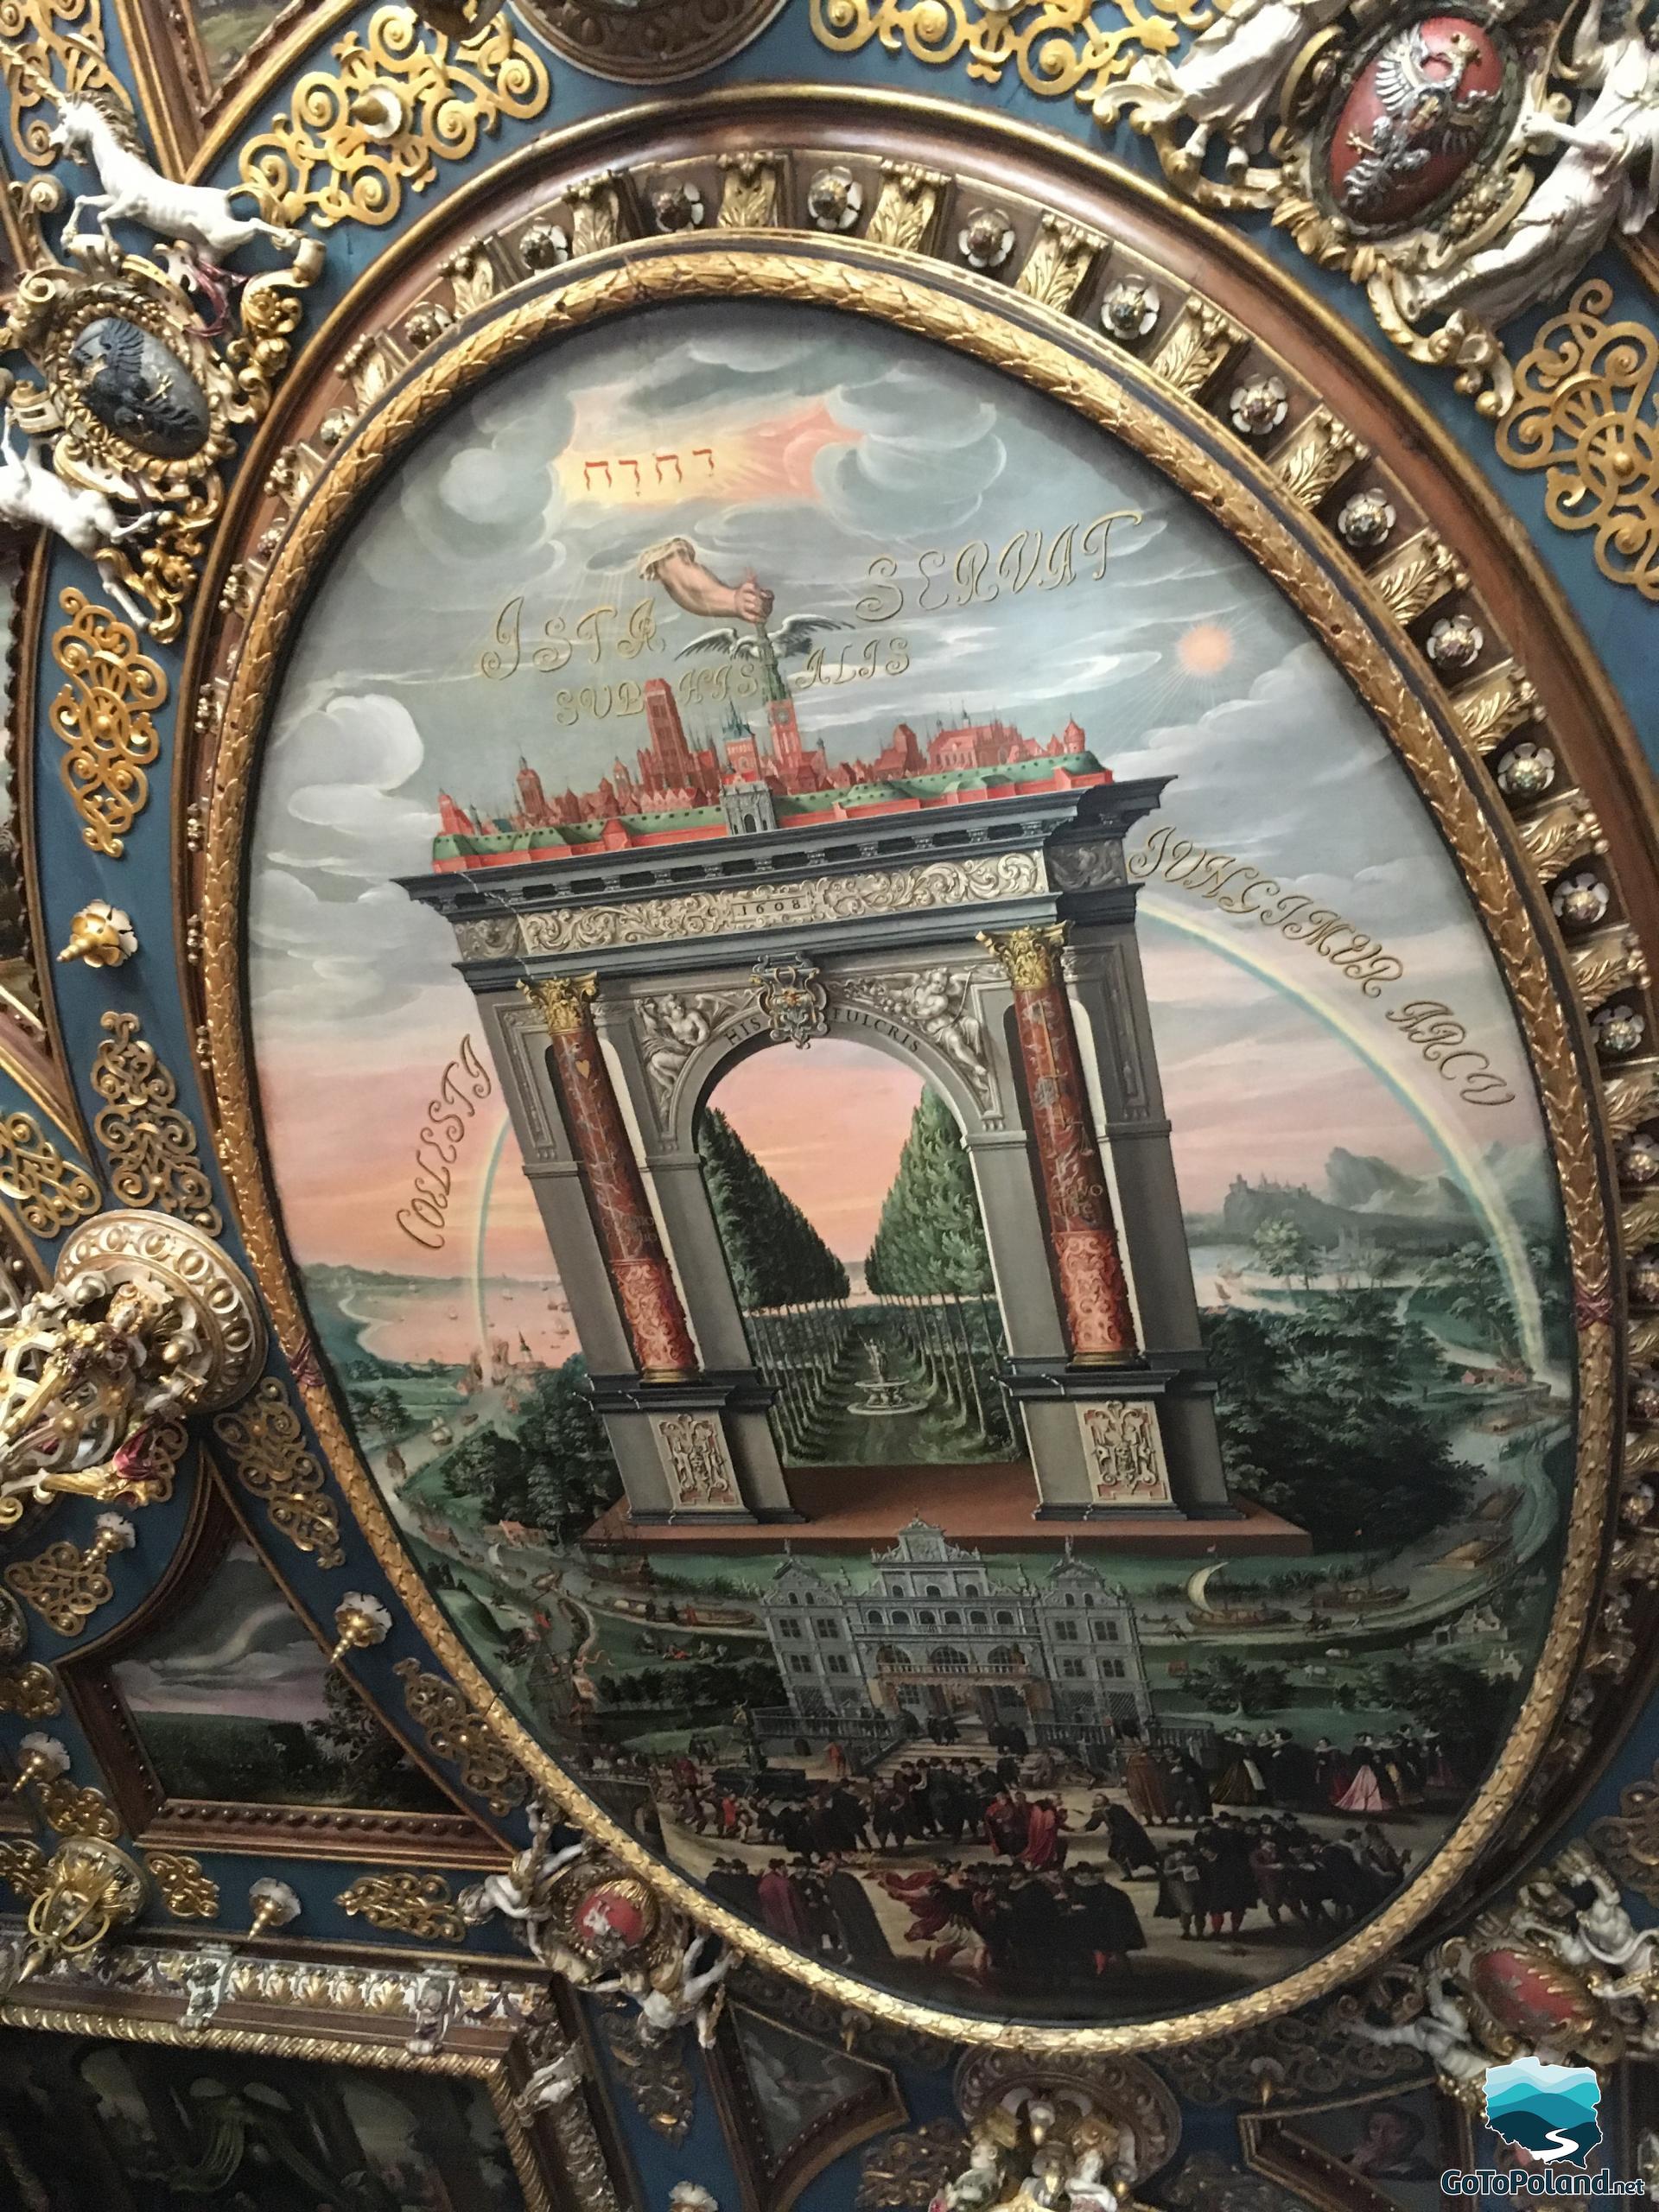 this is a fragment of a very decorative ceiling with a triumphal arch painted in a circle